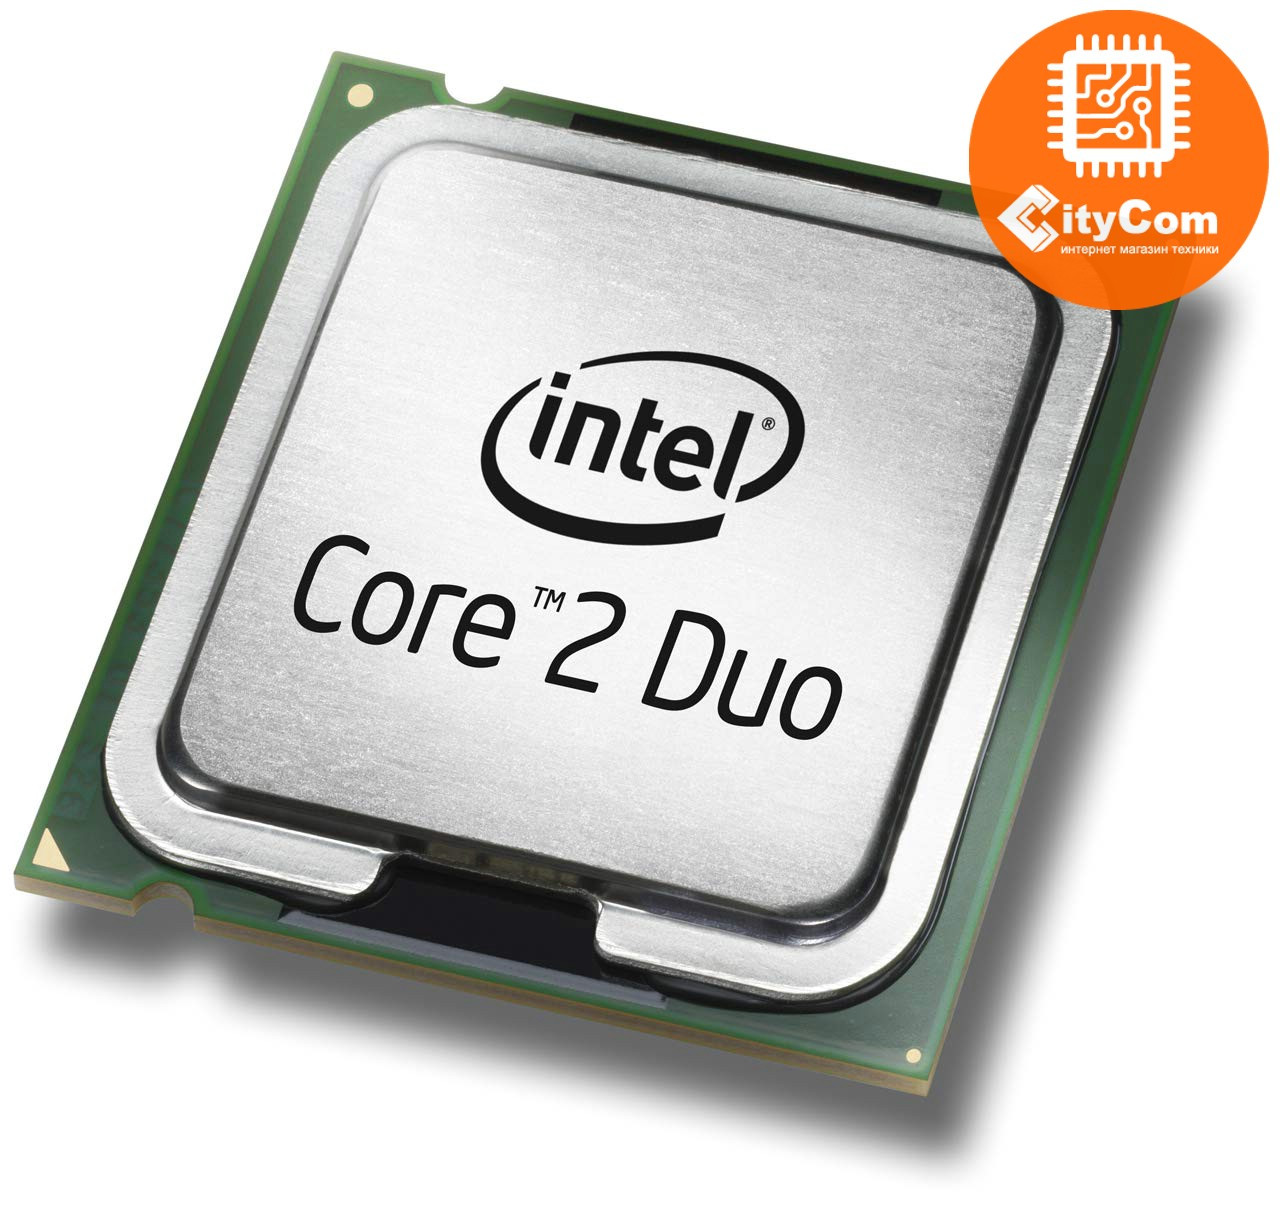 CPU Intel Core 2 Duo E8500 3.16GHz, 6Mb, 1333MHz, oem Арт.1371